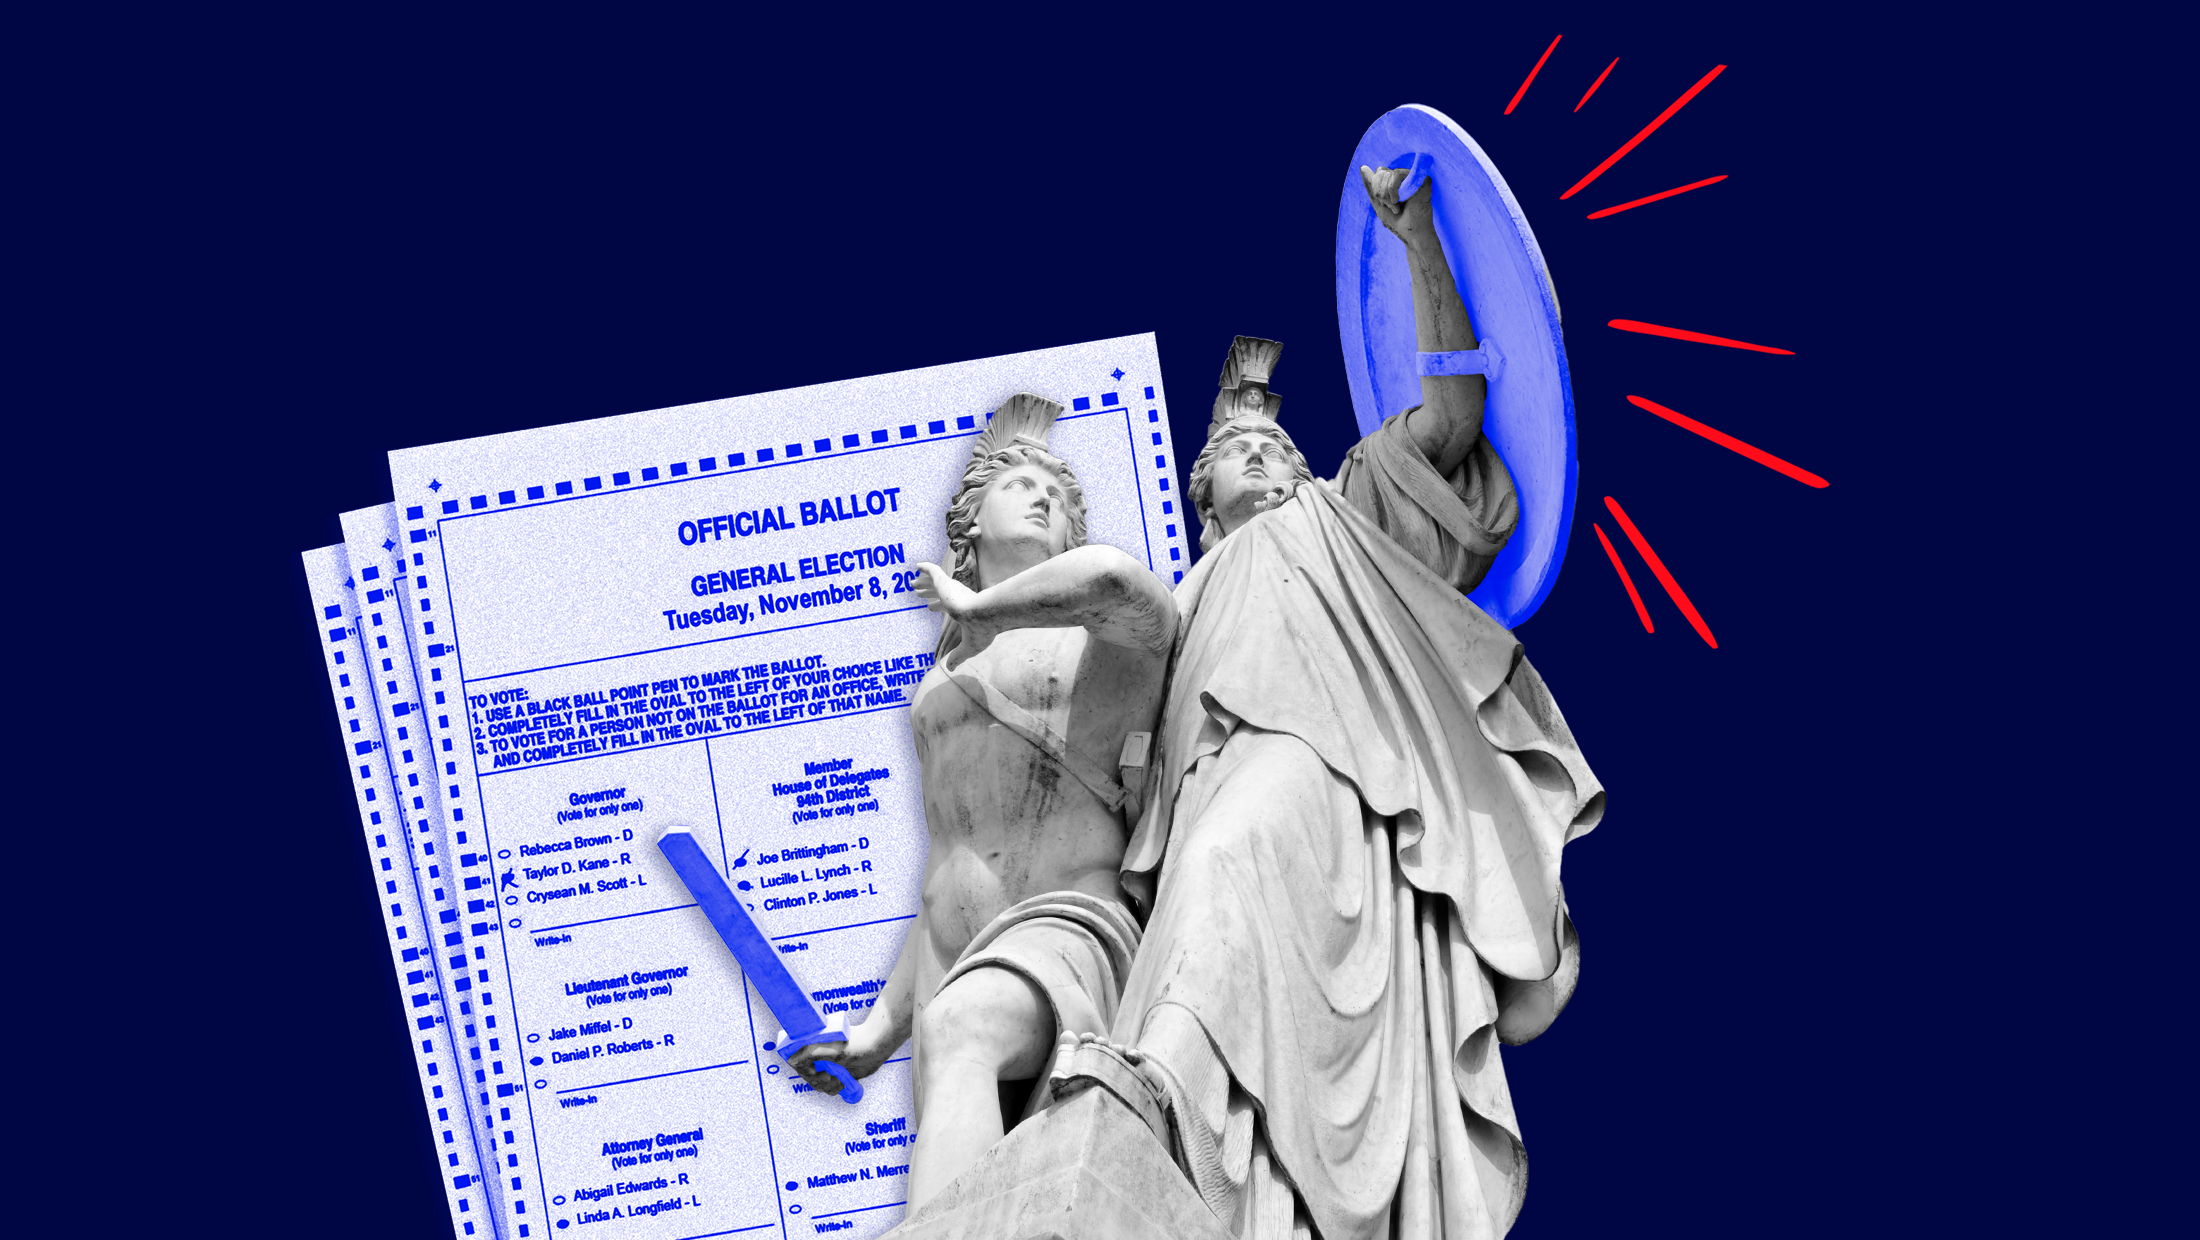 Two neoclassical statues holding a sword and shield, defending a set of 2022 general election ballots